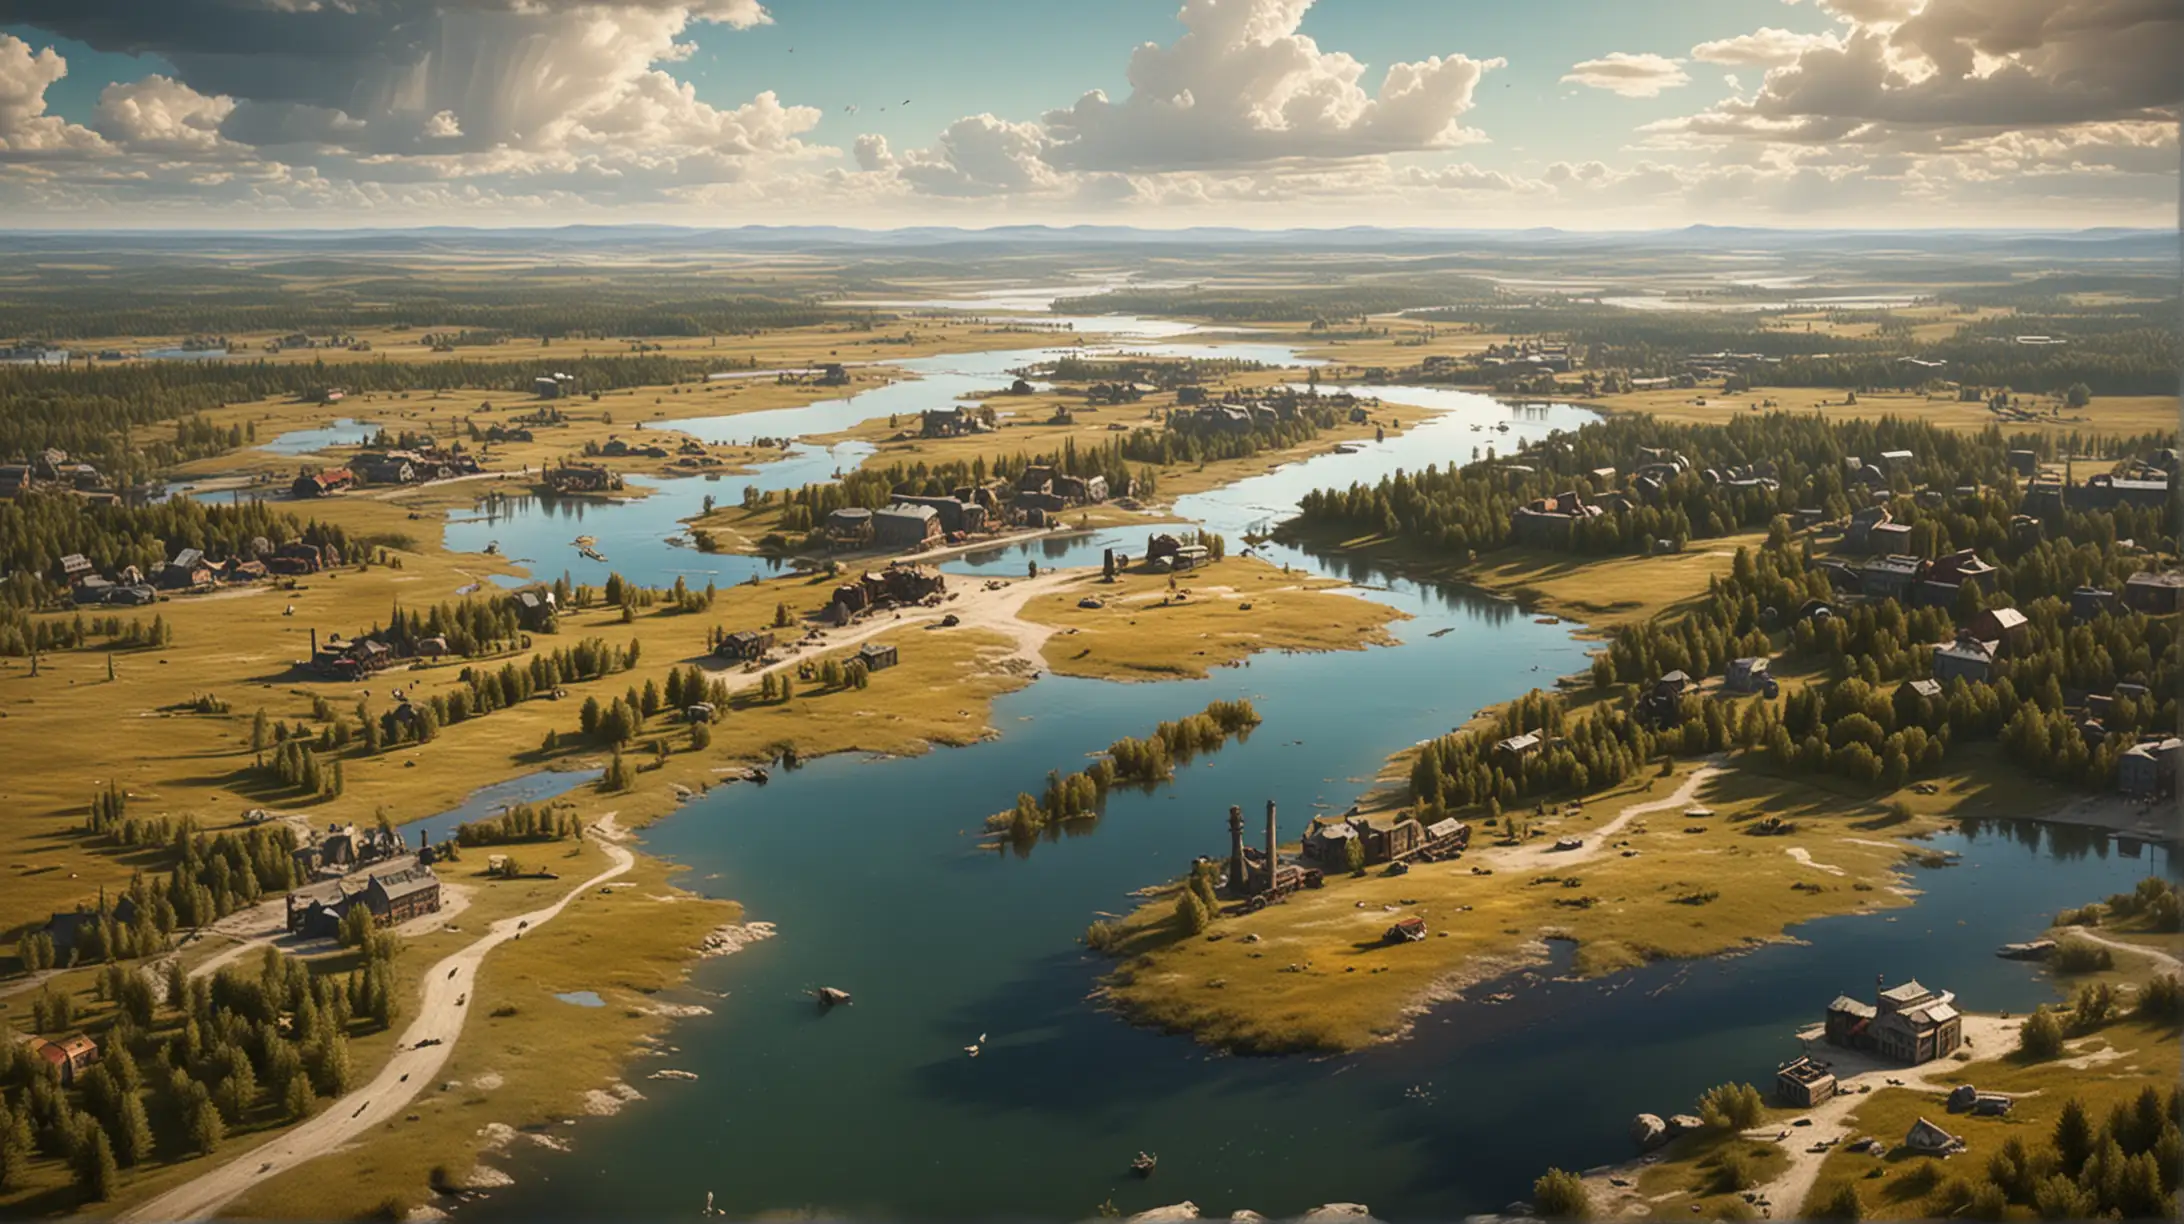 The landscape of the wilderness with the wild river, small lake, and steampunk city on the horizon, sunny, bird's eye distant view